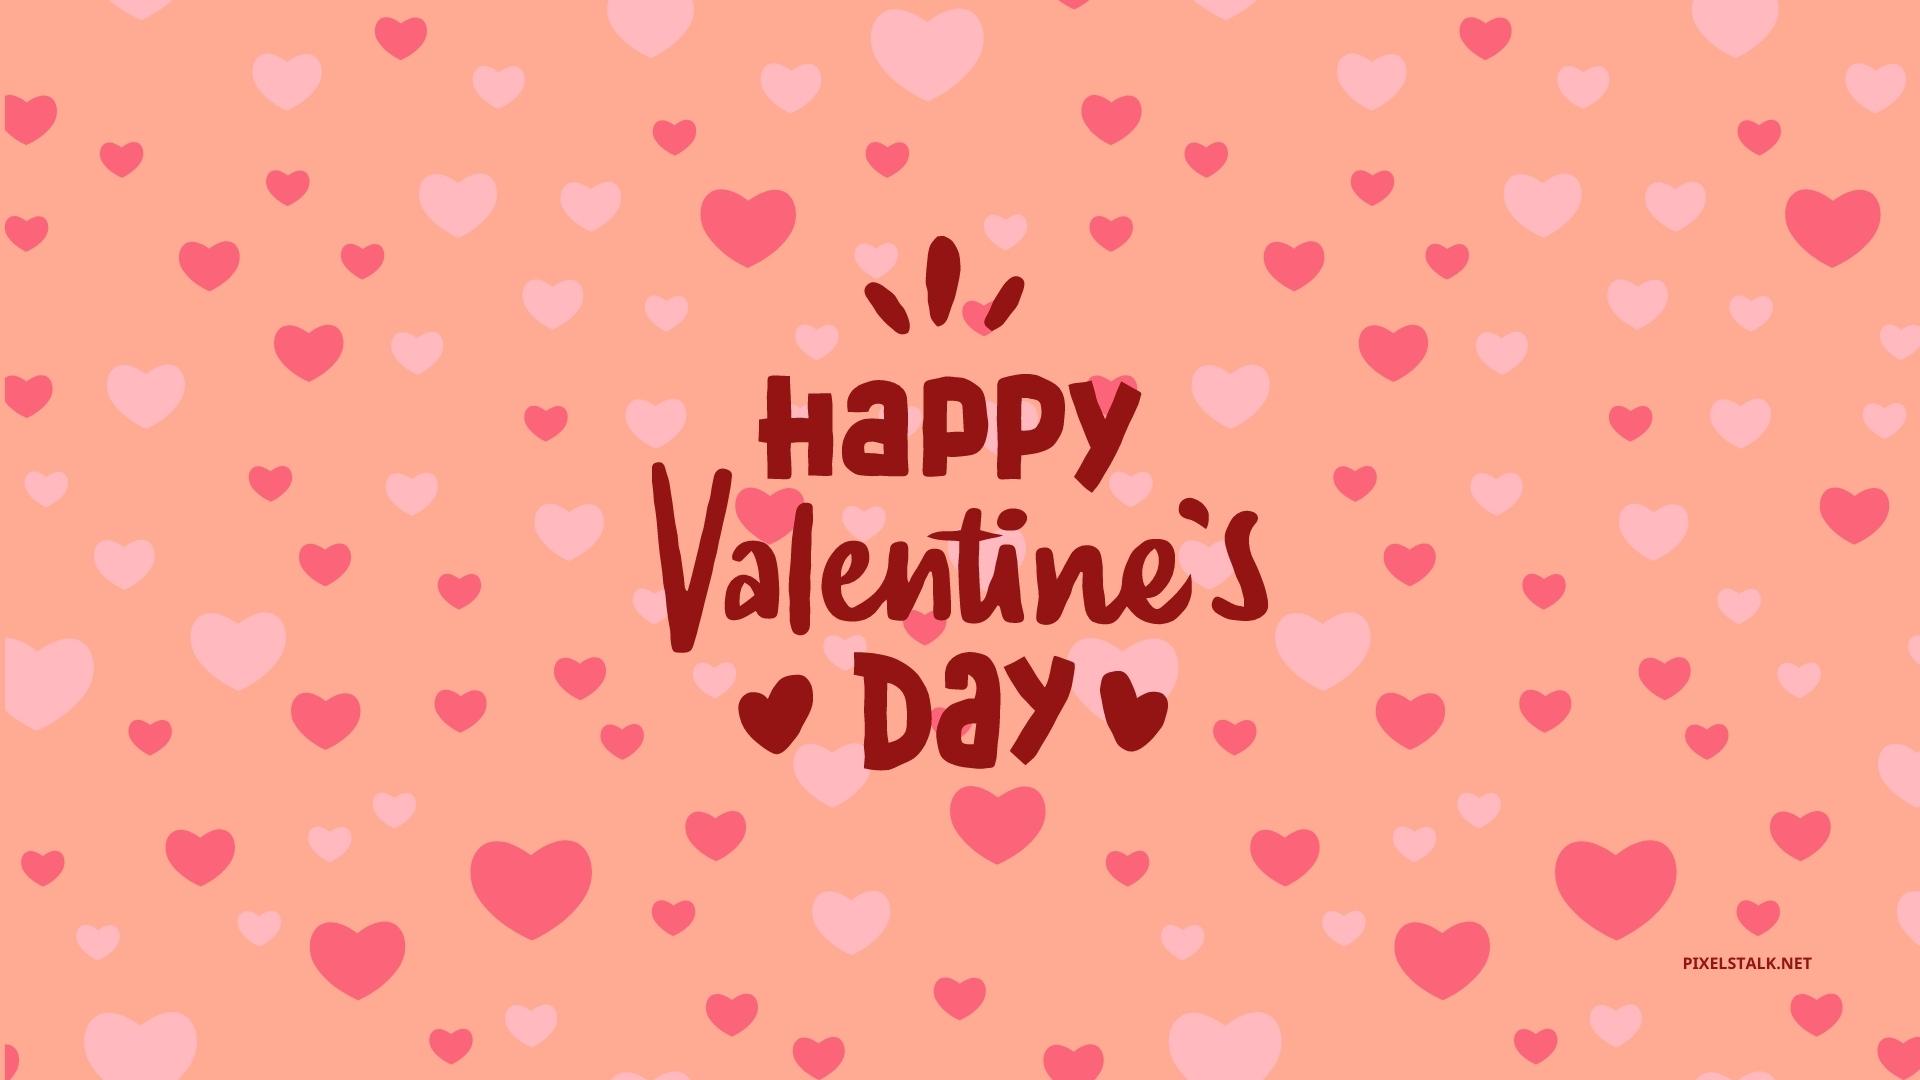 Valentines Day Wallpaper Photos Download The BEST Free Valentines Day  Wallpaper Stock Photos  HD Images